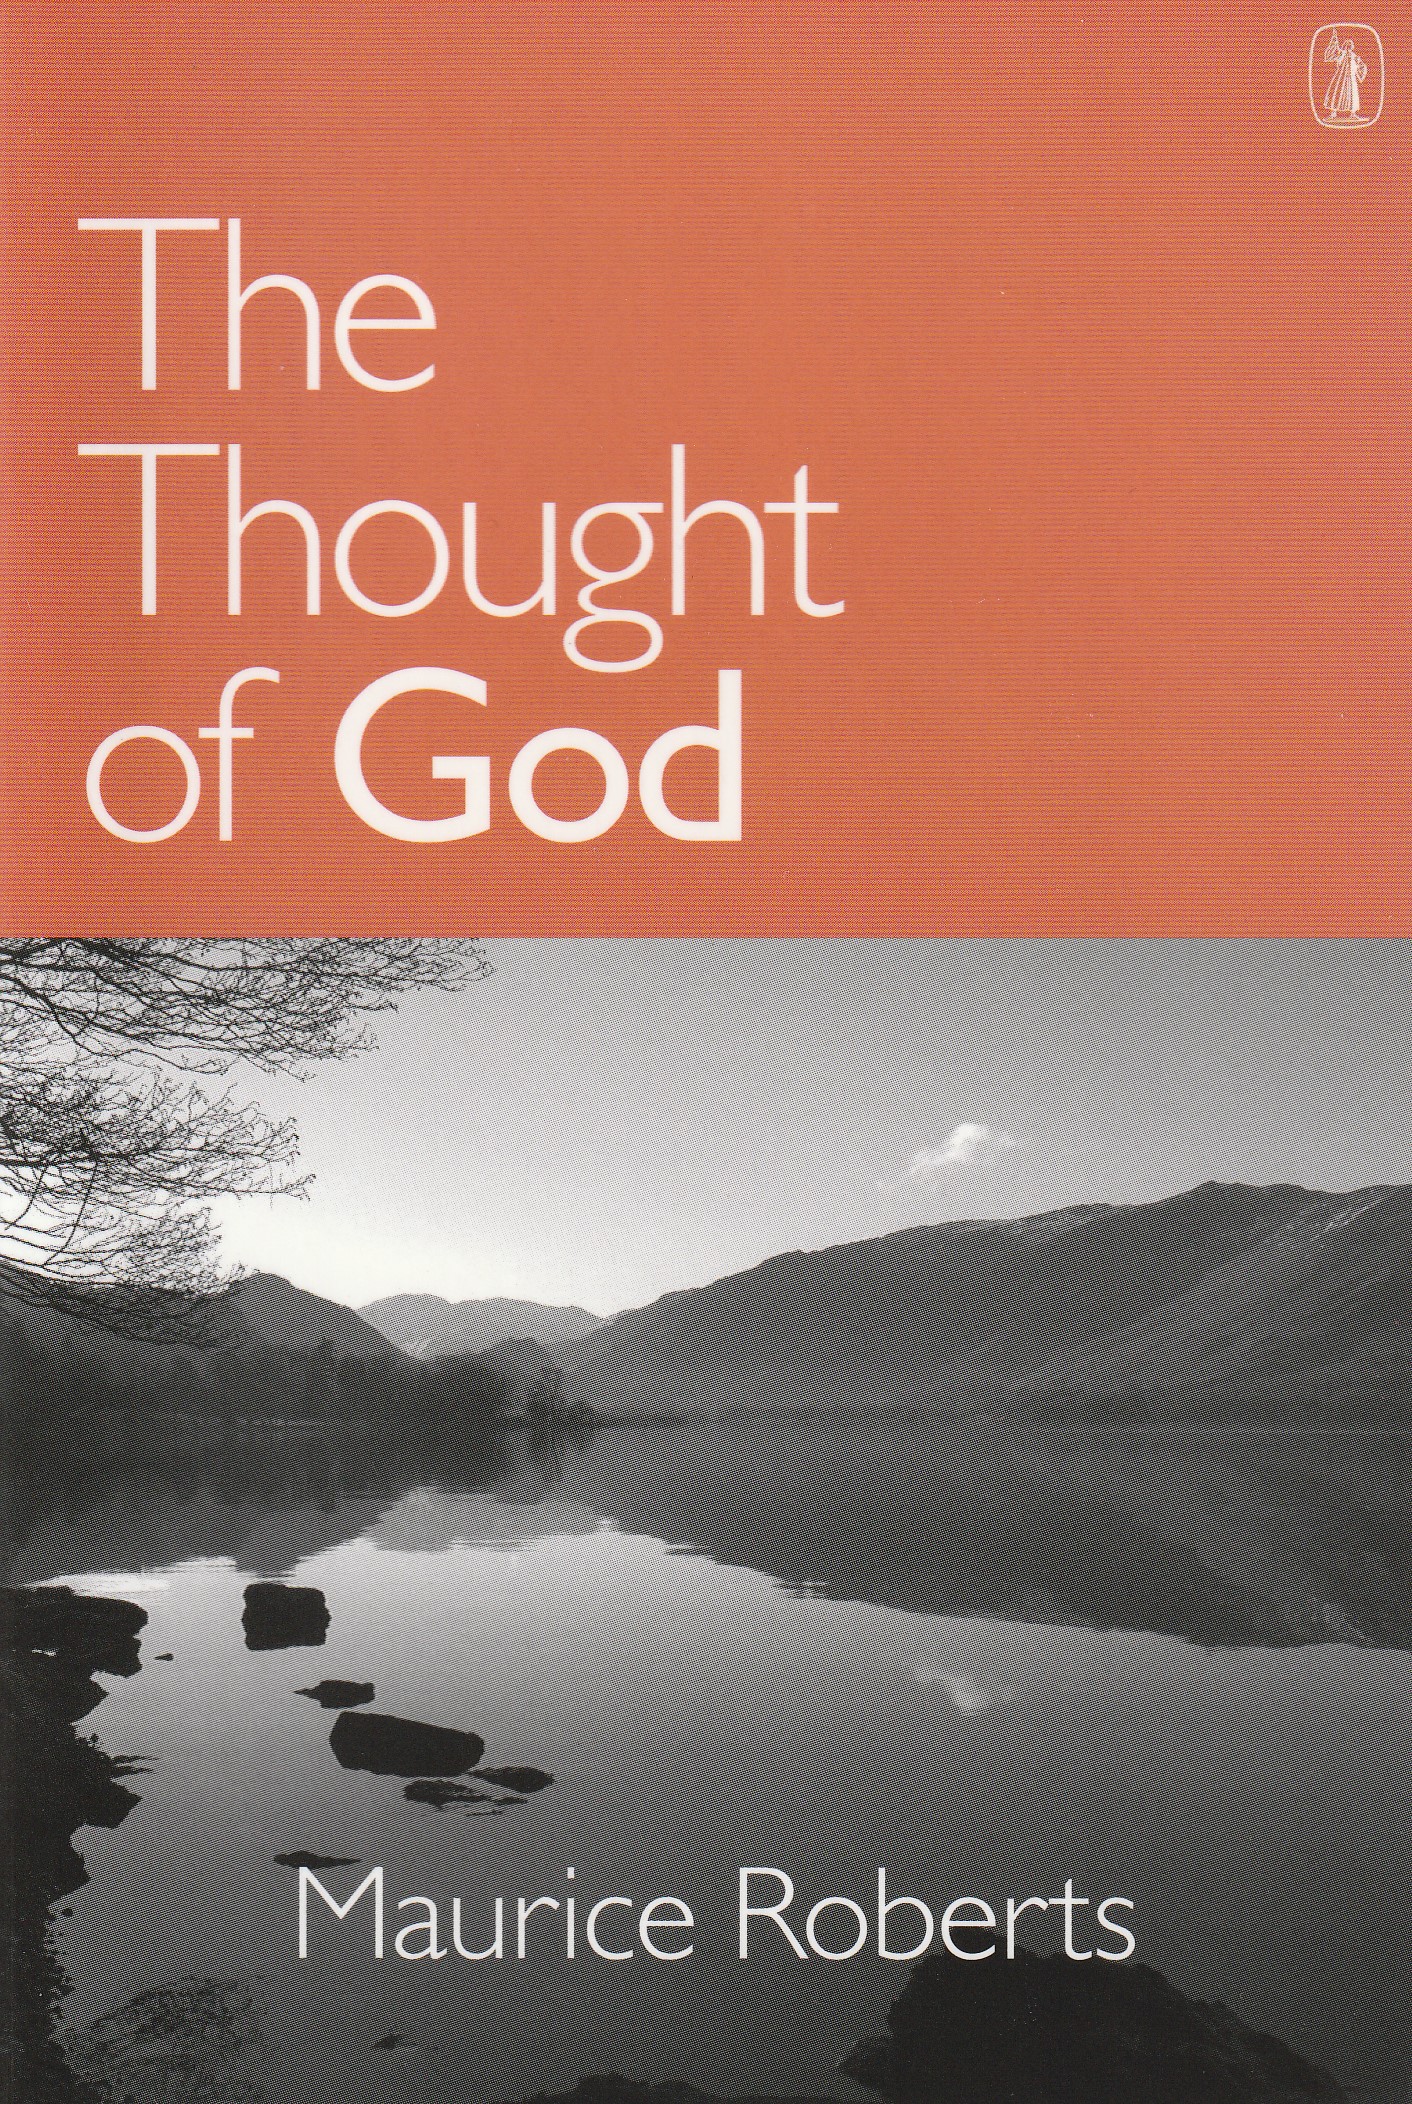 The Thought of God